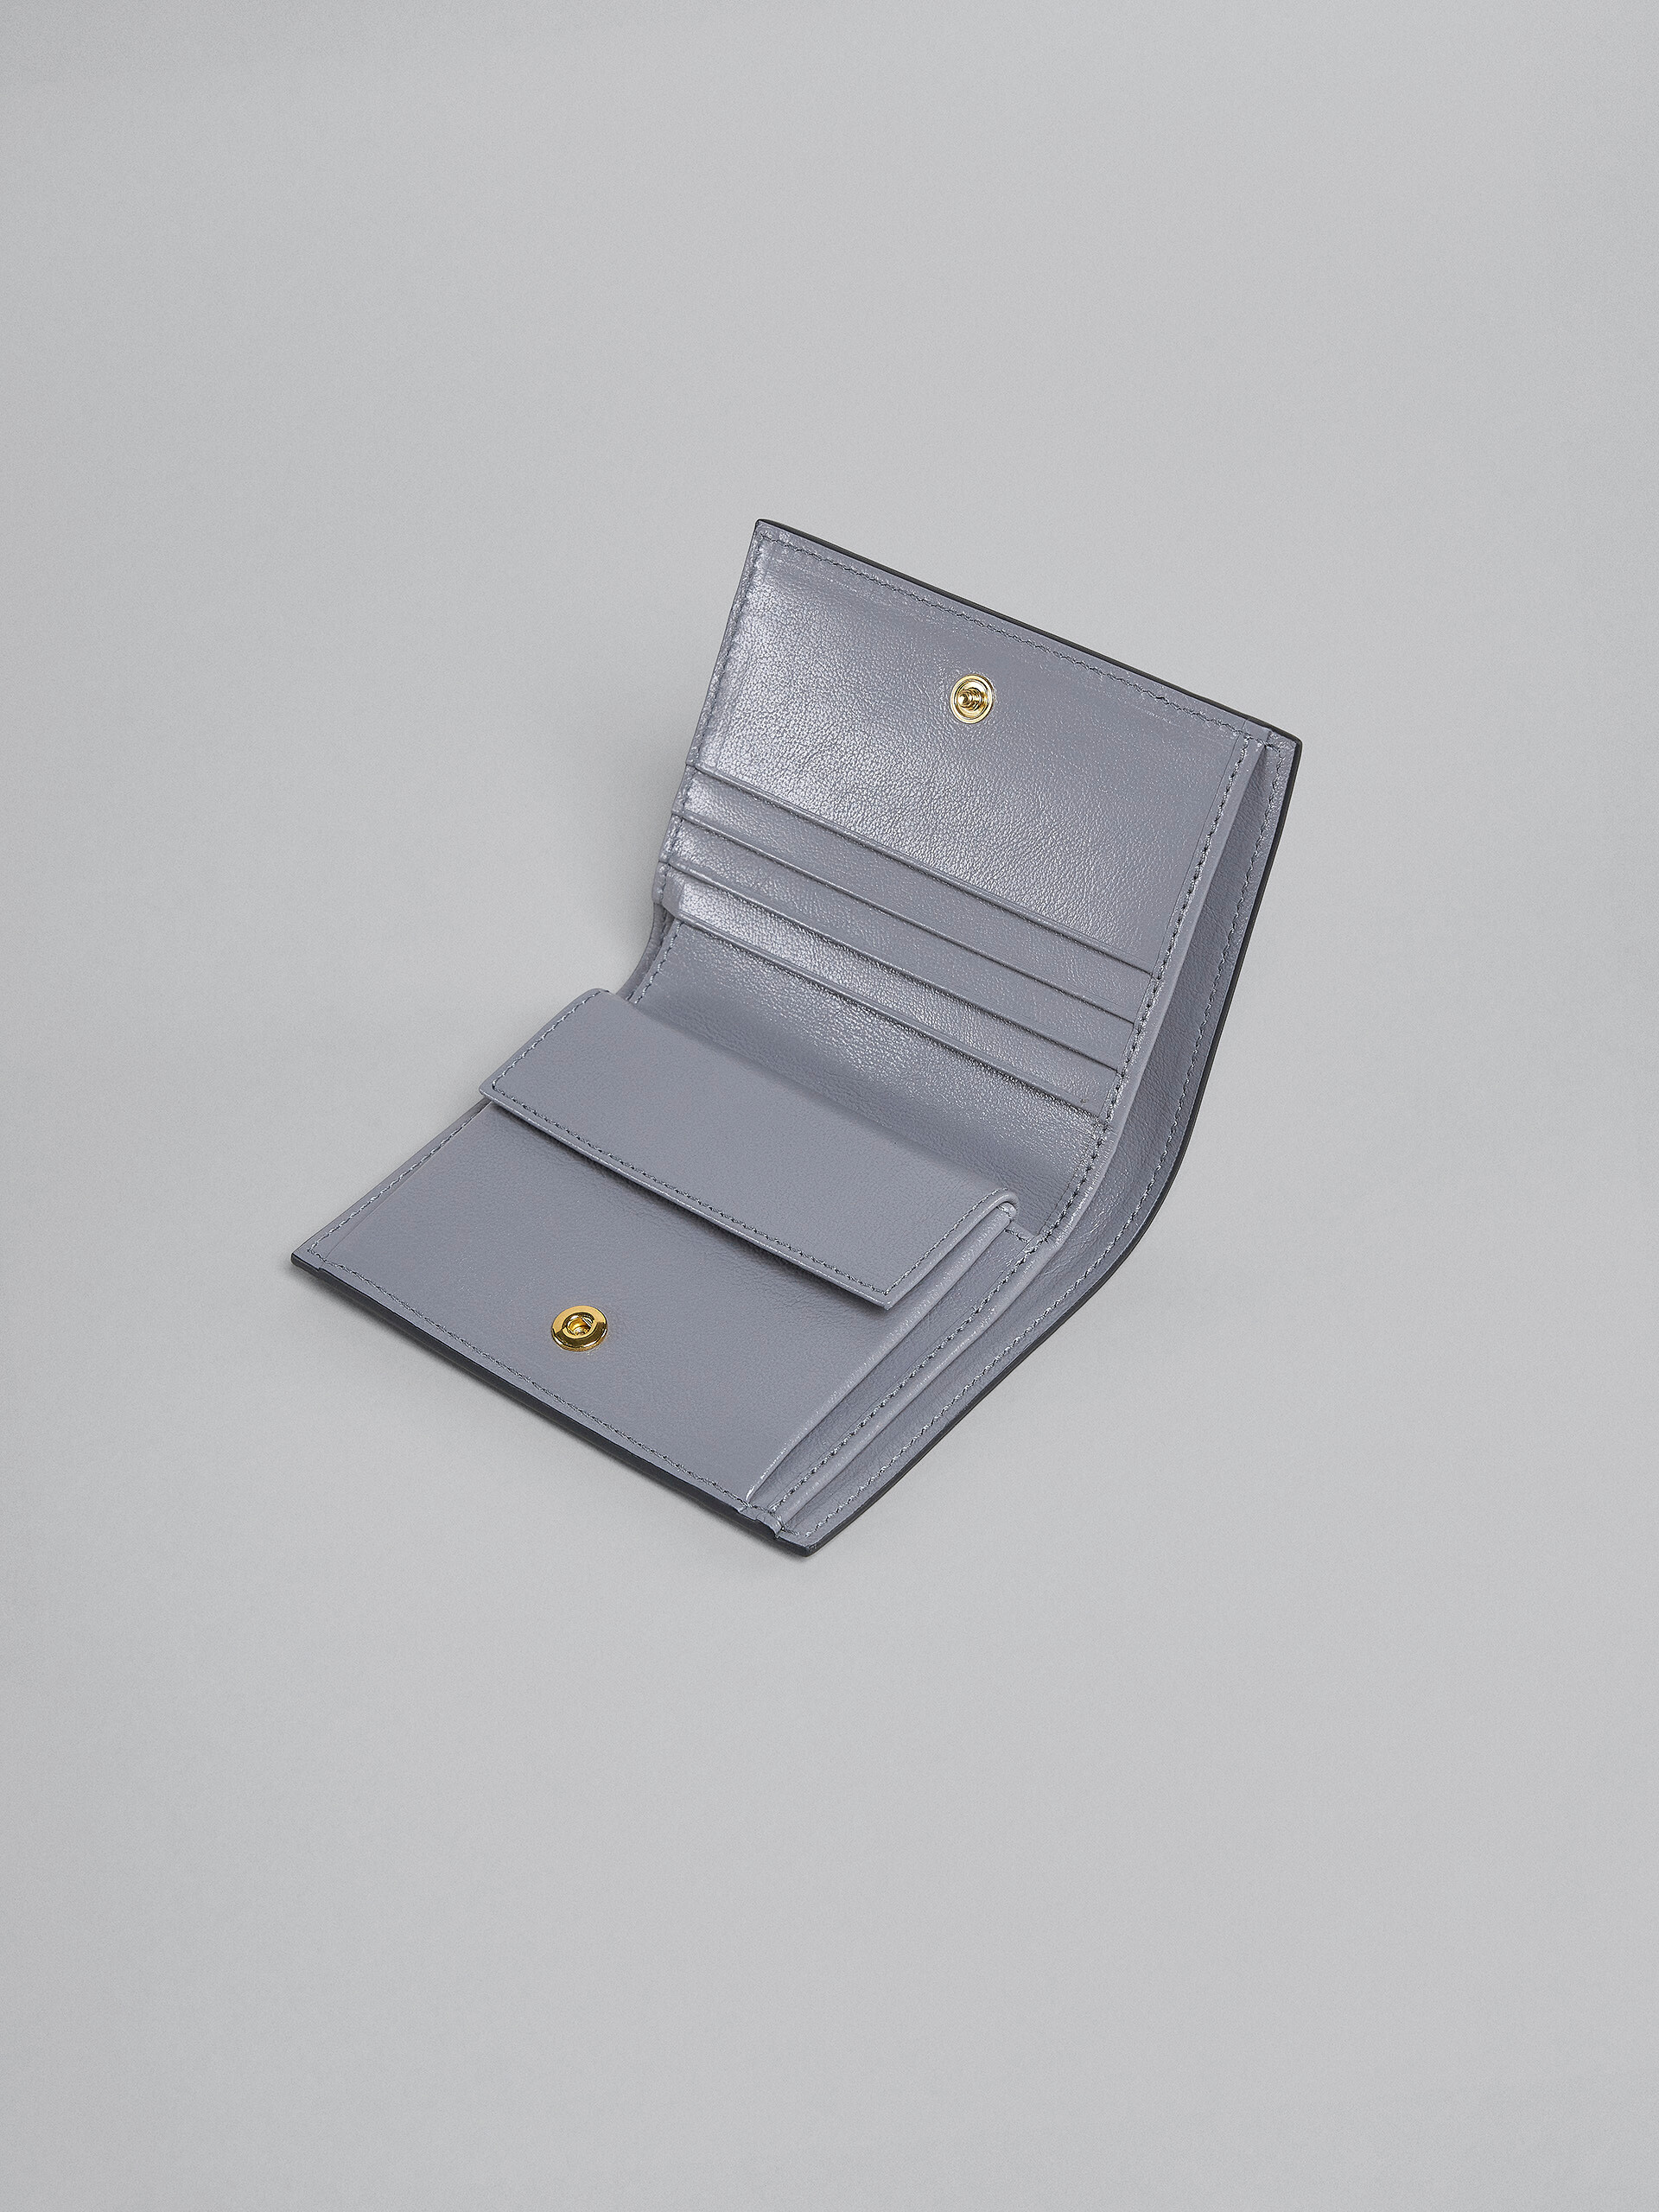 Grey and blue leather bi-fold wallet - Wallets - Image 4